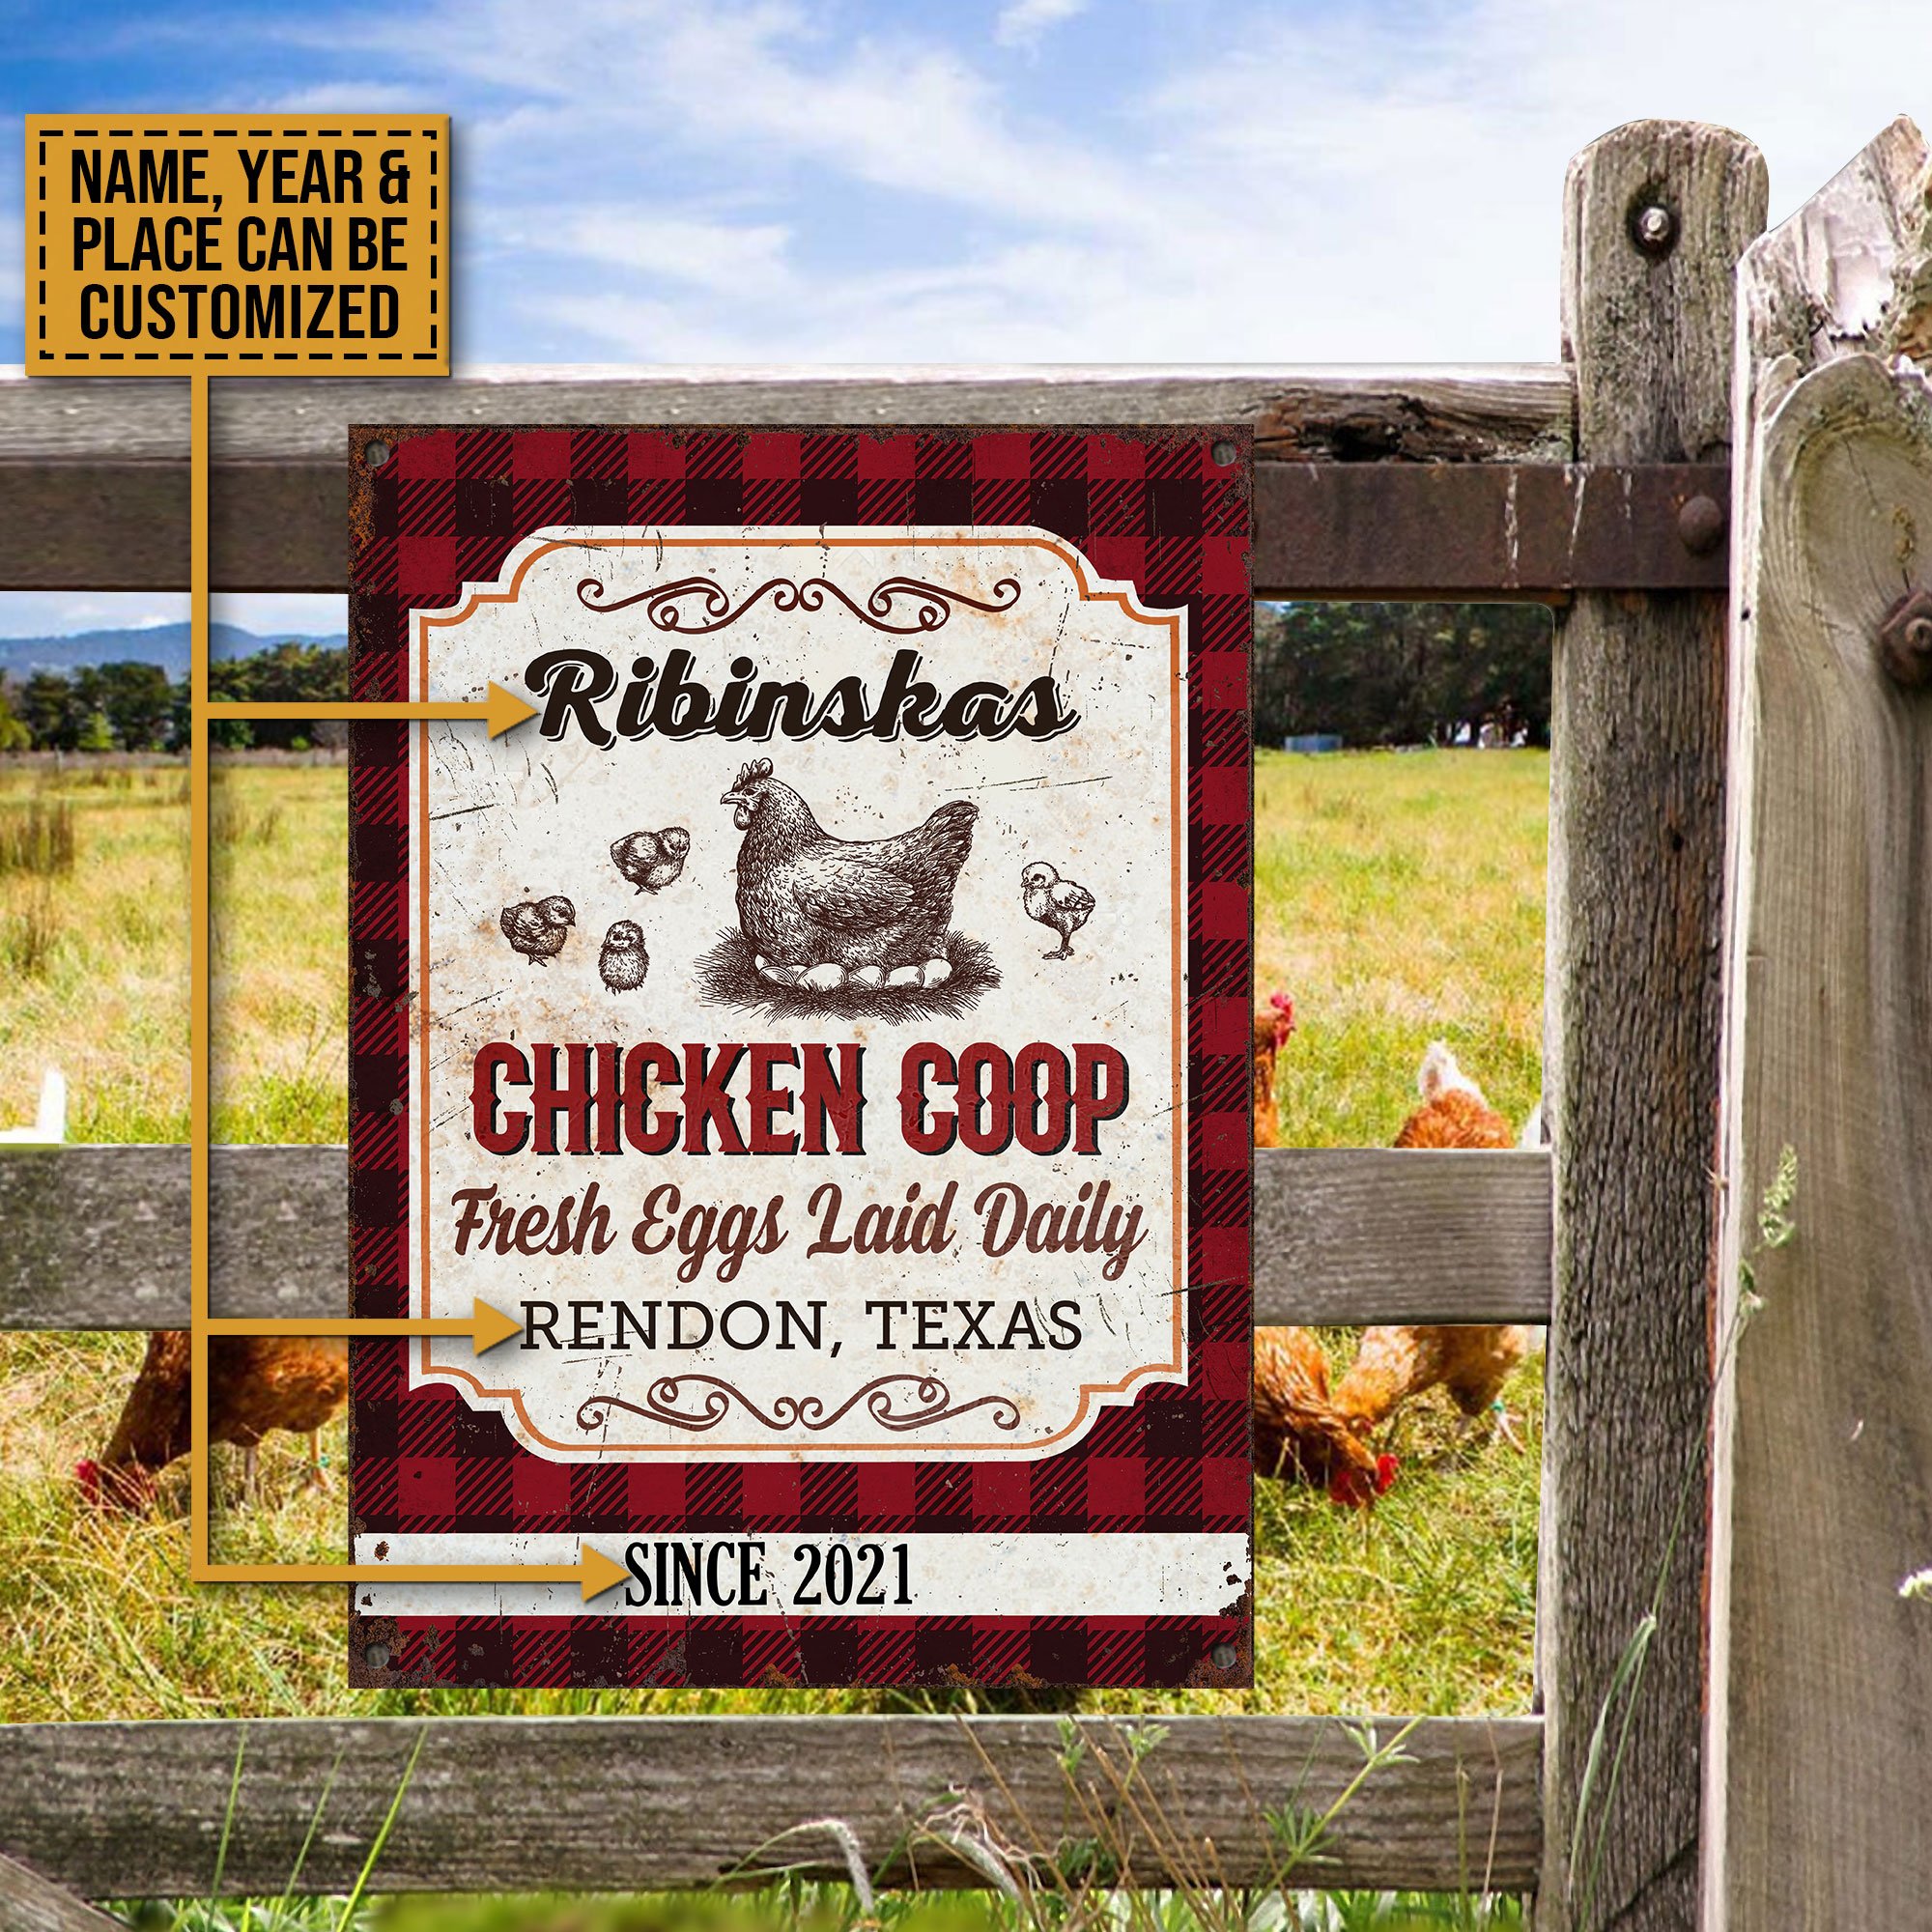 Personalized Chick Chicken Coop Fresh Eggs Laid Daily Customized Classic Metal Signs